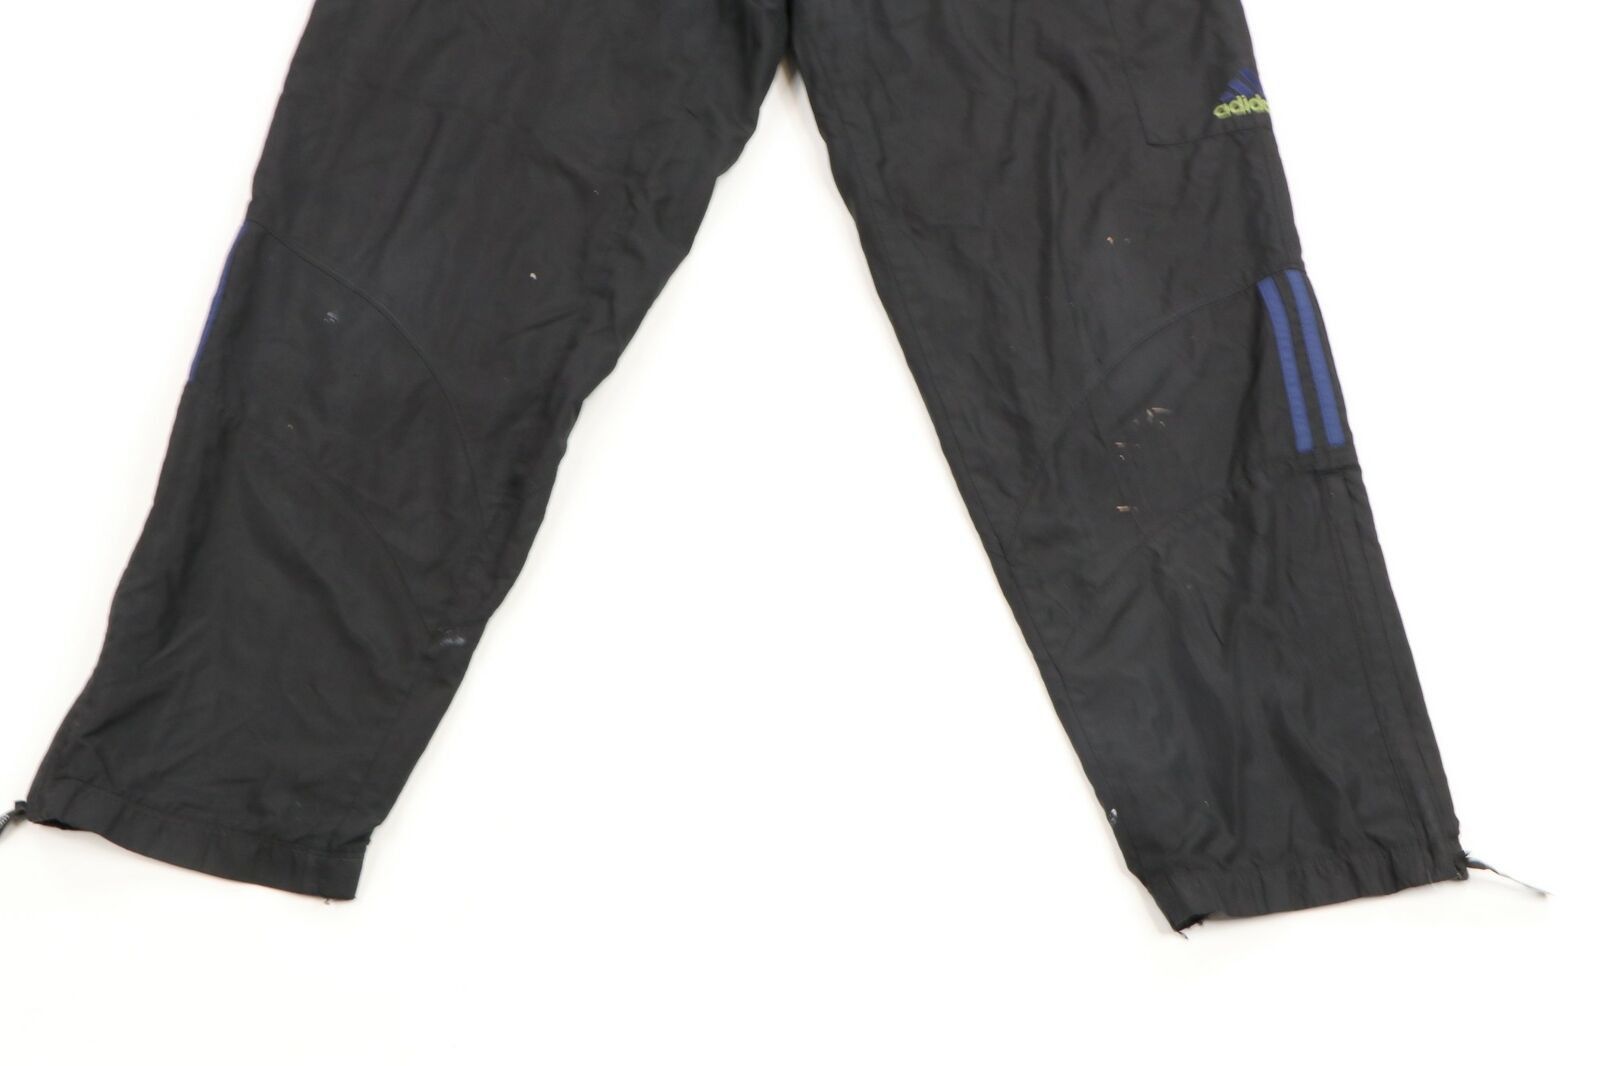 Adidas Vintage 90s Adidas Lined Spell Out Striped Zip Cuff Pants Size US 32 / EU 48 - 3 Thumbnail